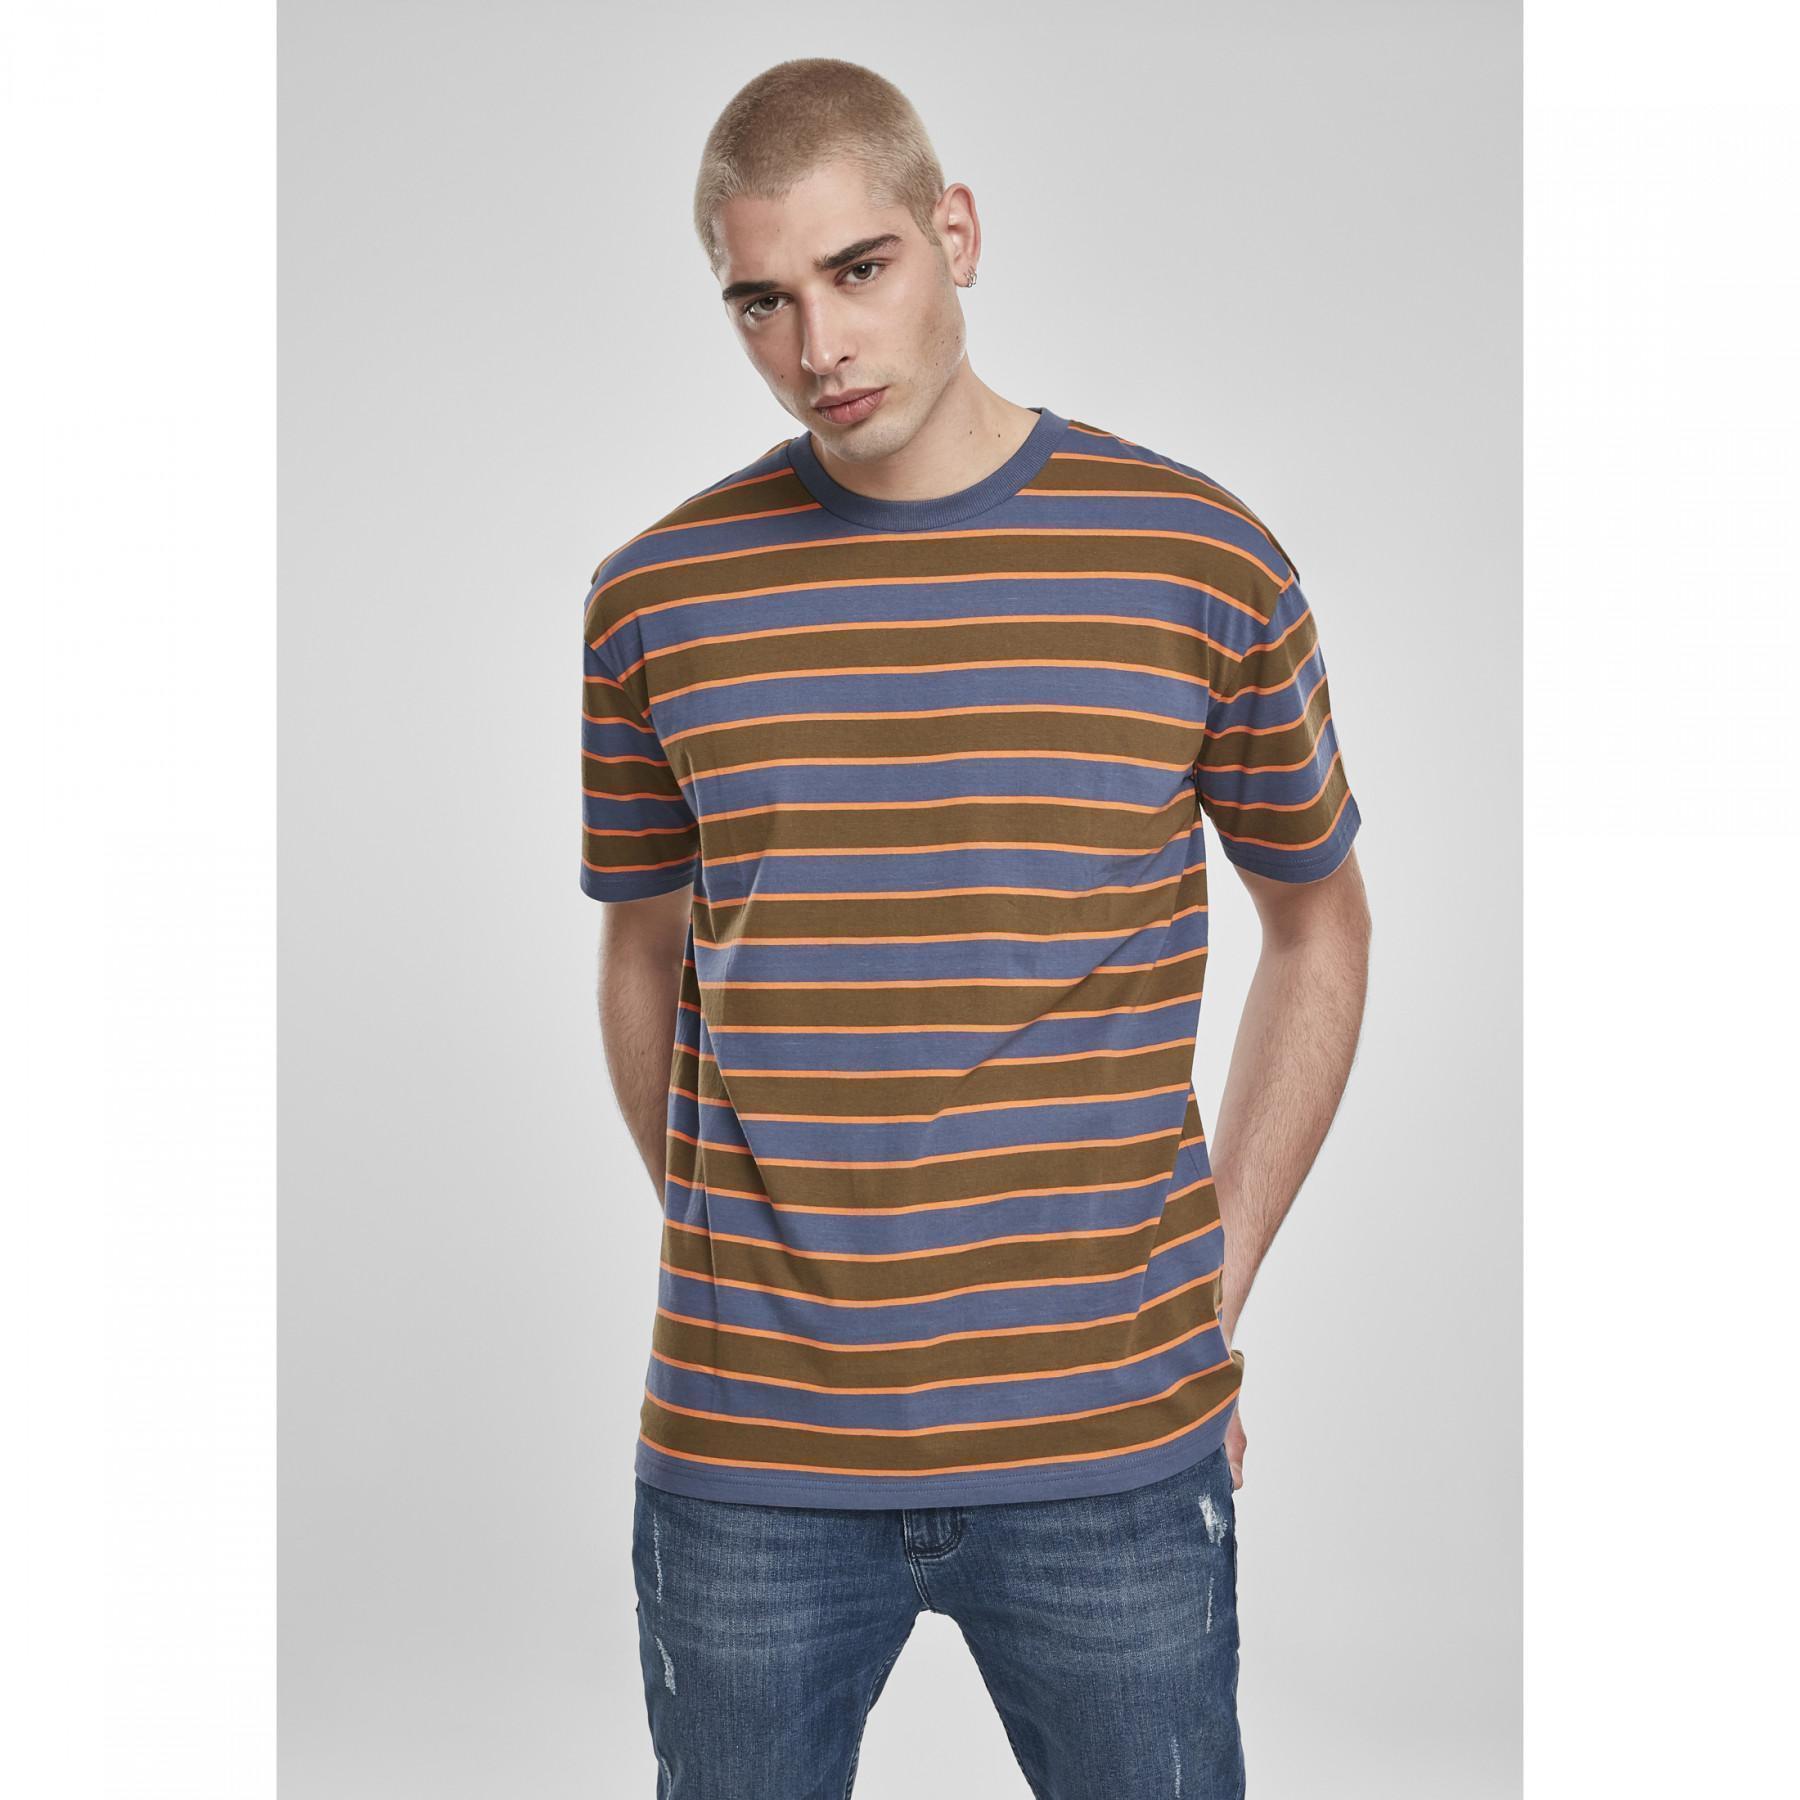 T-shirt Urban Classics yarn dyed oversized board stripe (grandes tailles)